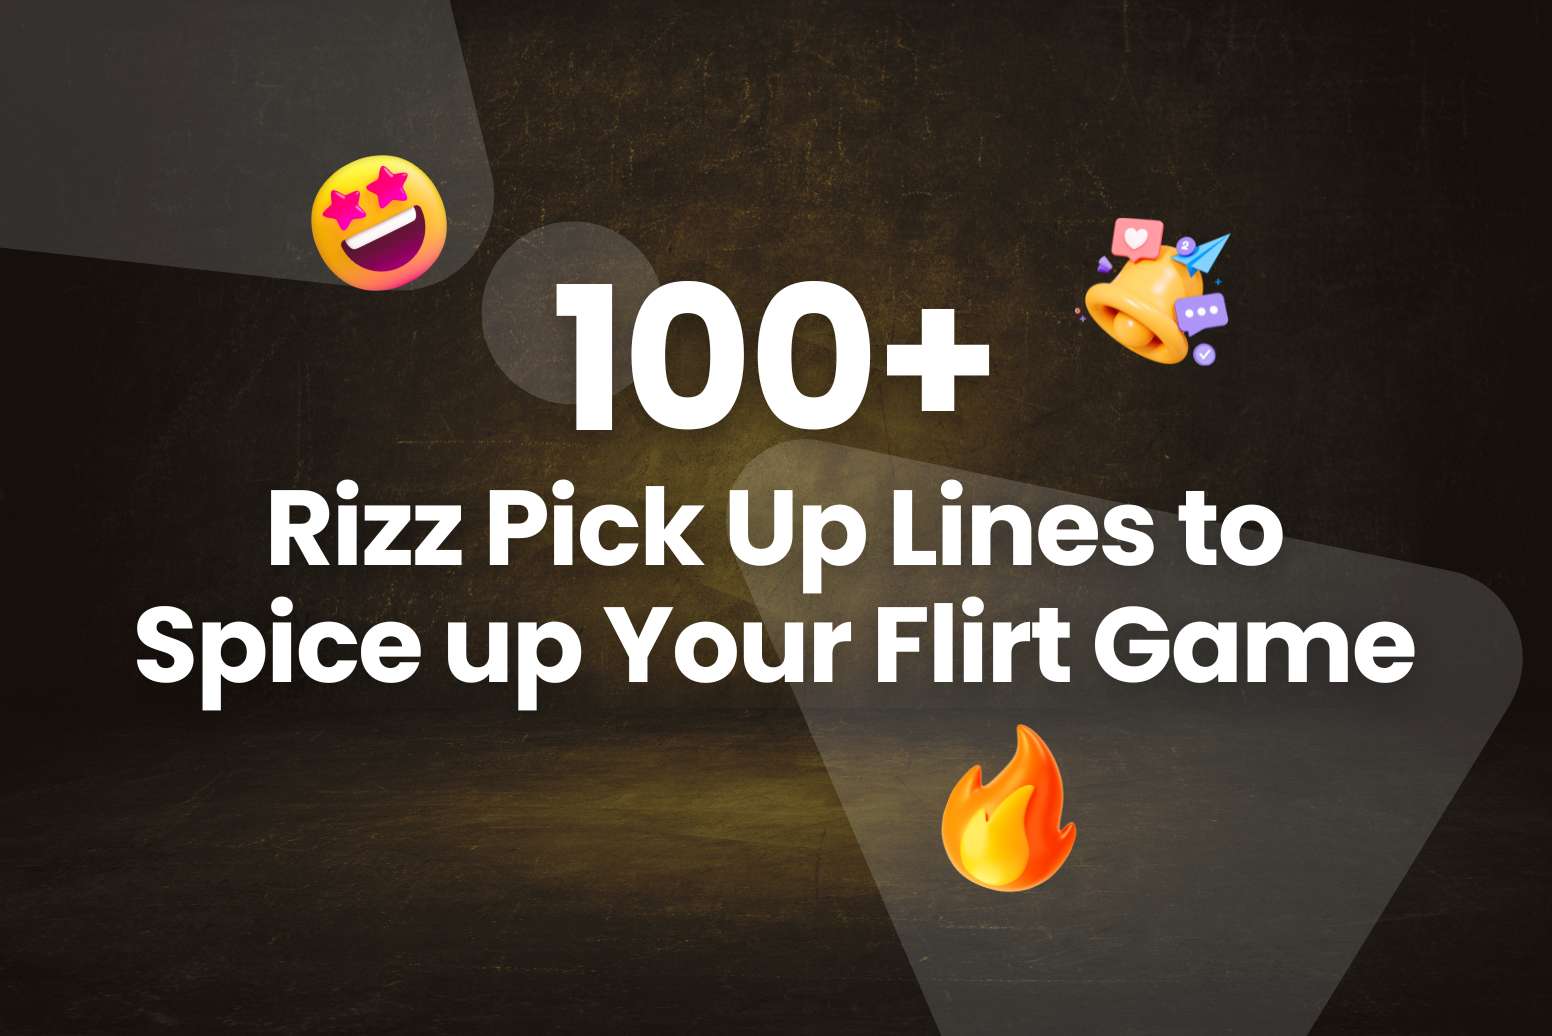 100+ Rizz Pick Up Lines to Spice up Your First Game